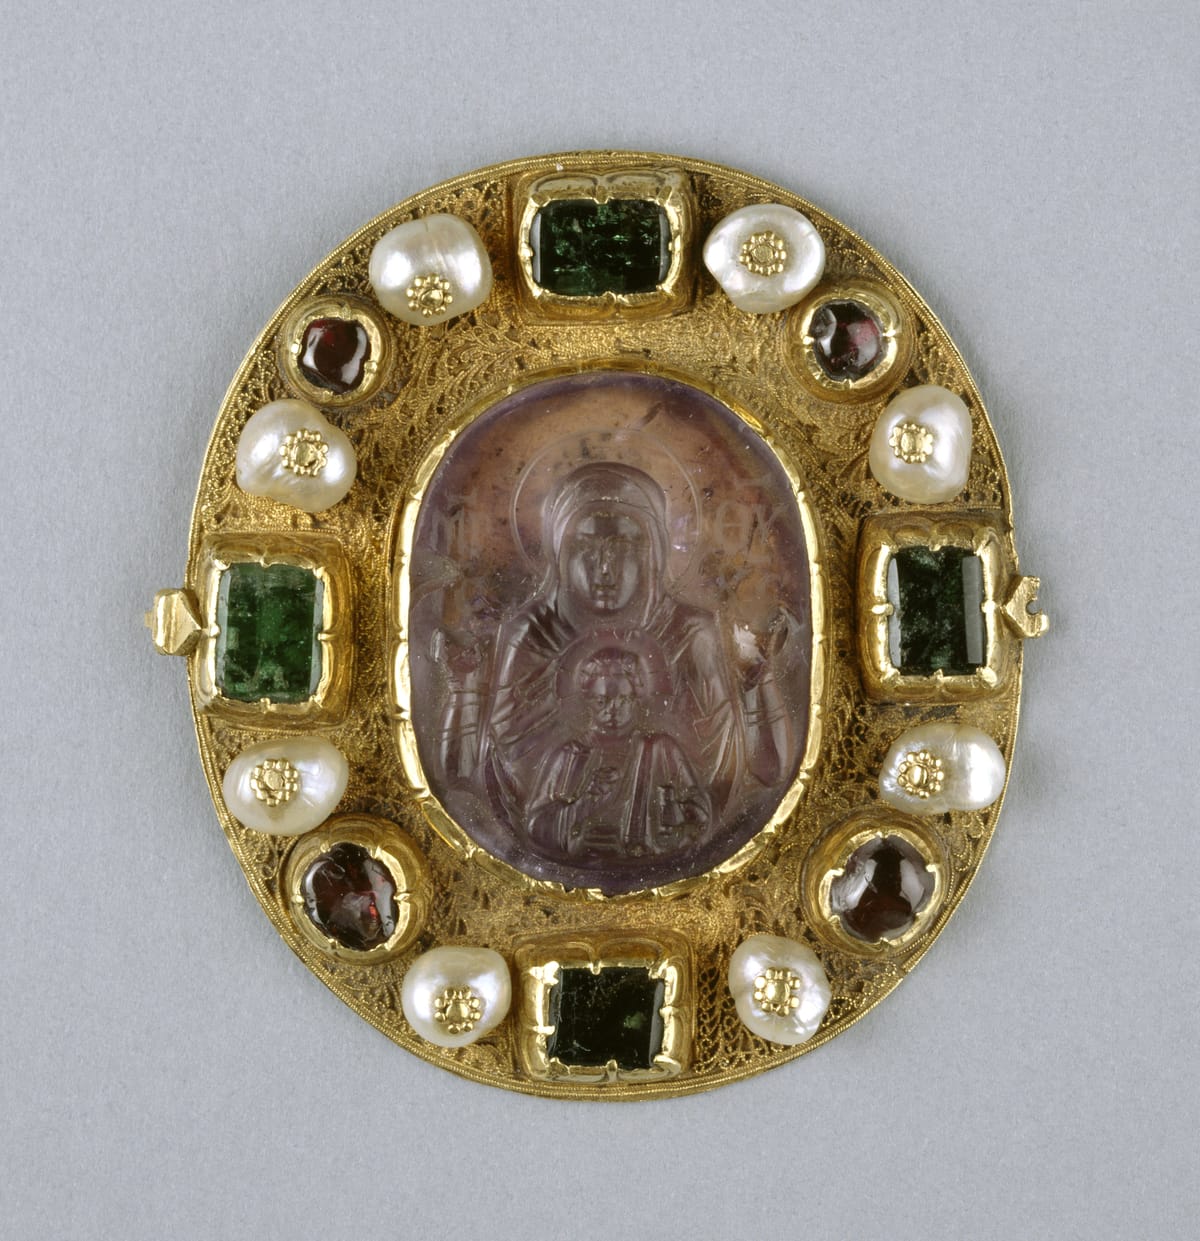 Reliquary Pendant with Virgin and Child (Greek, mid-16th Century) - Byzantine Stock Photo